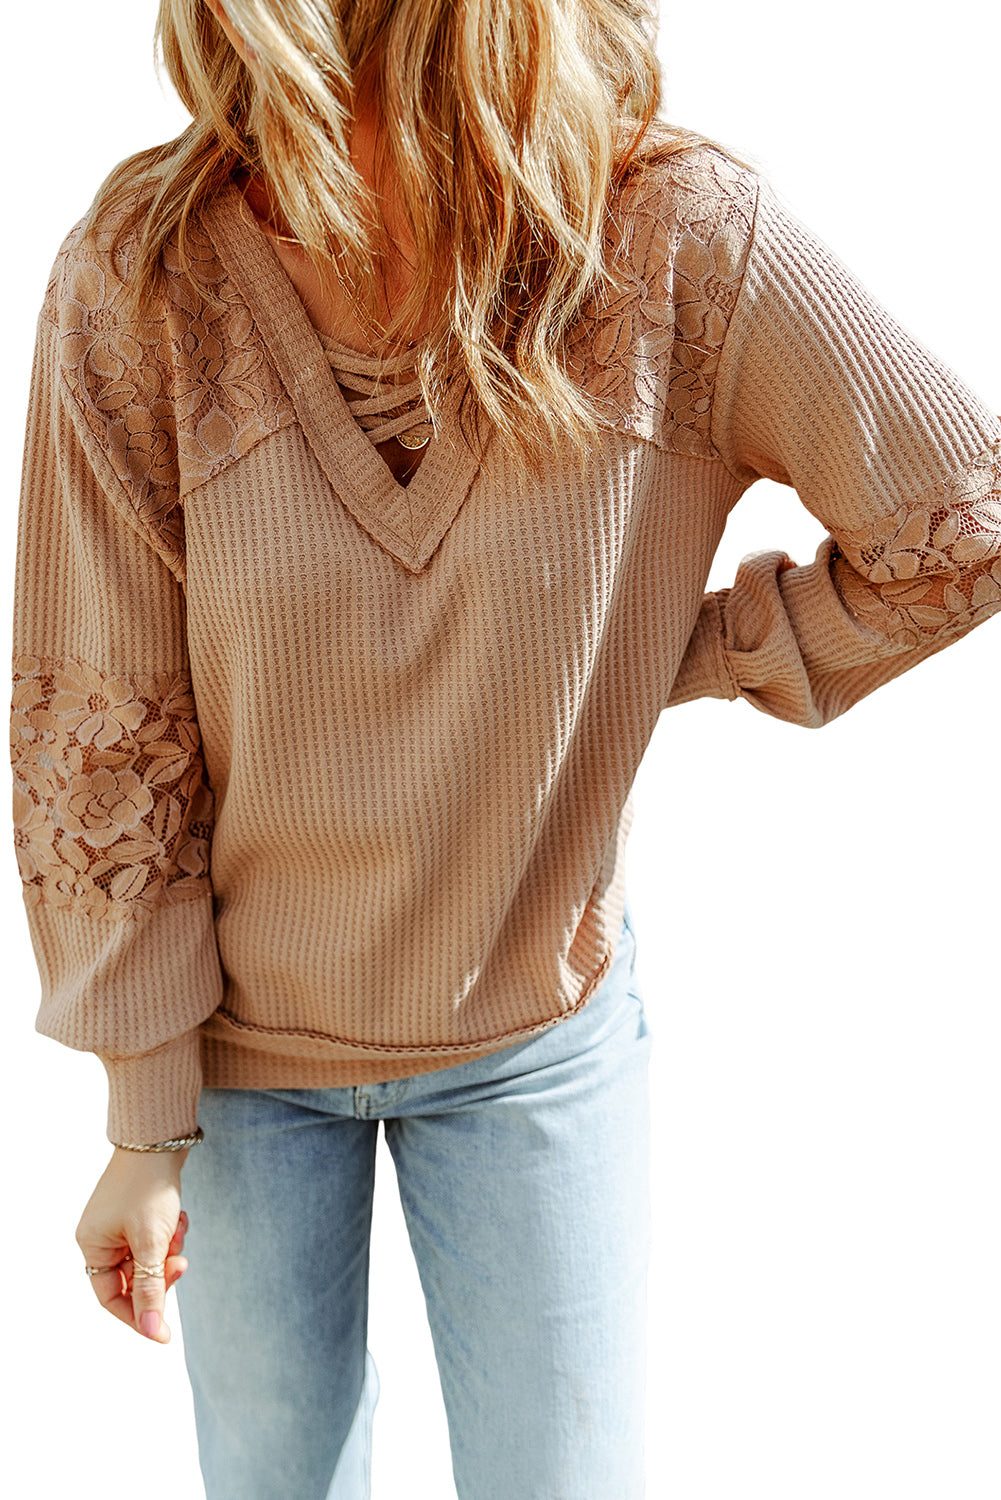 Apricot Lace Waffle Patchwork Strappy V Neck Long Sleeve Top-5